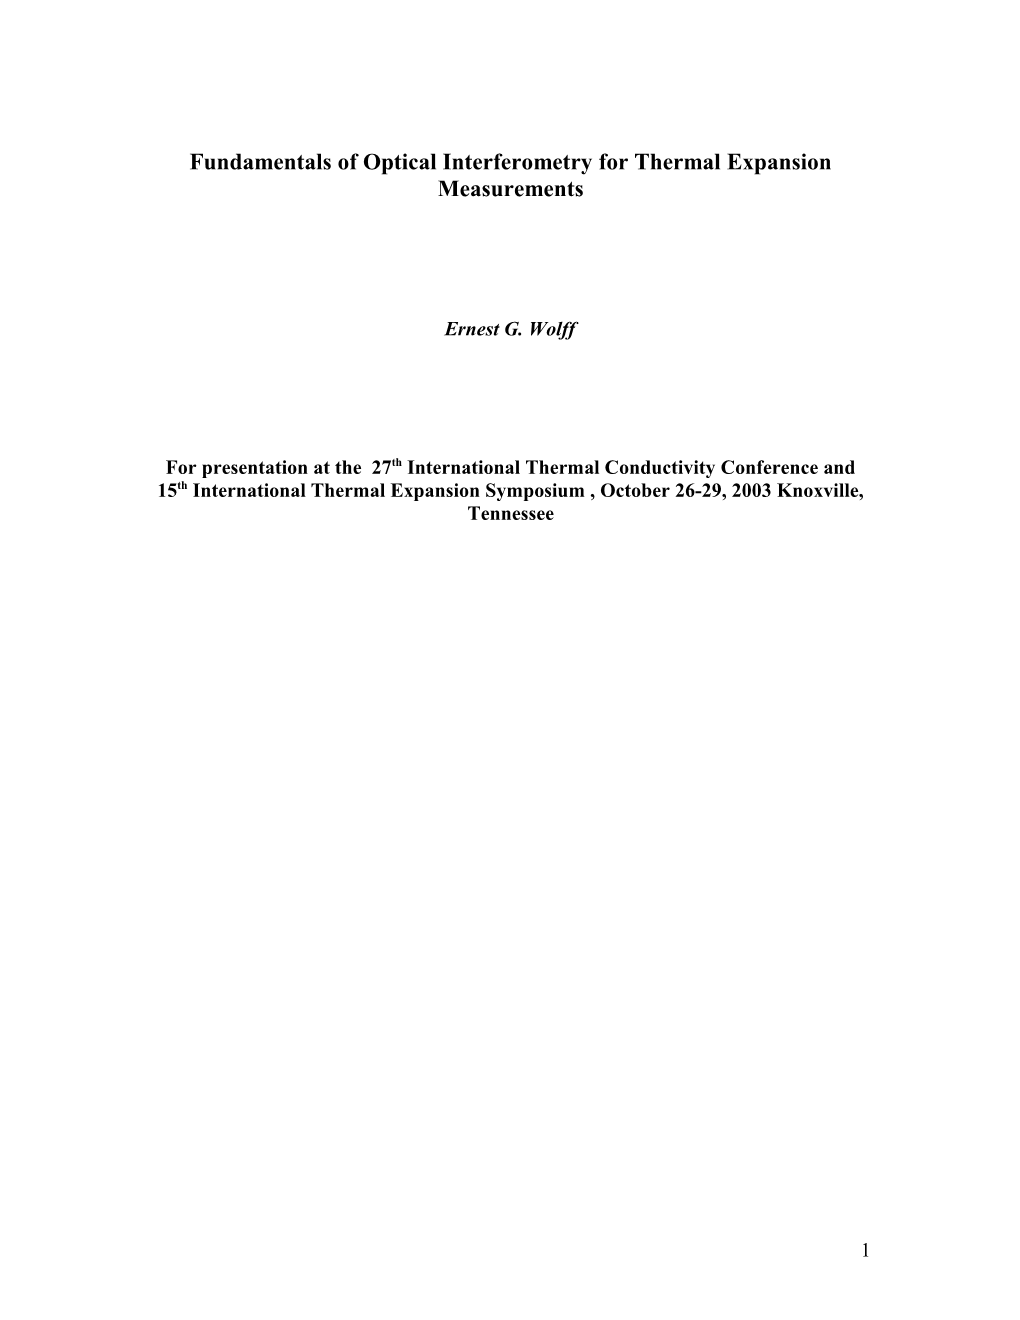 Fundamentals of Optical Interferometry for Thermal Expansion Measurements